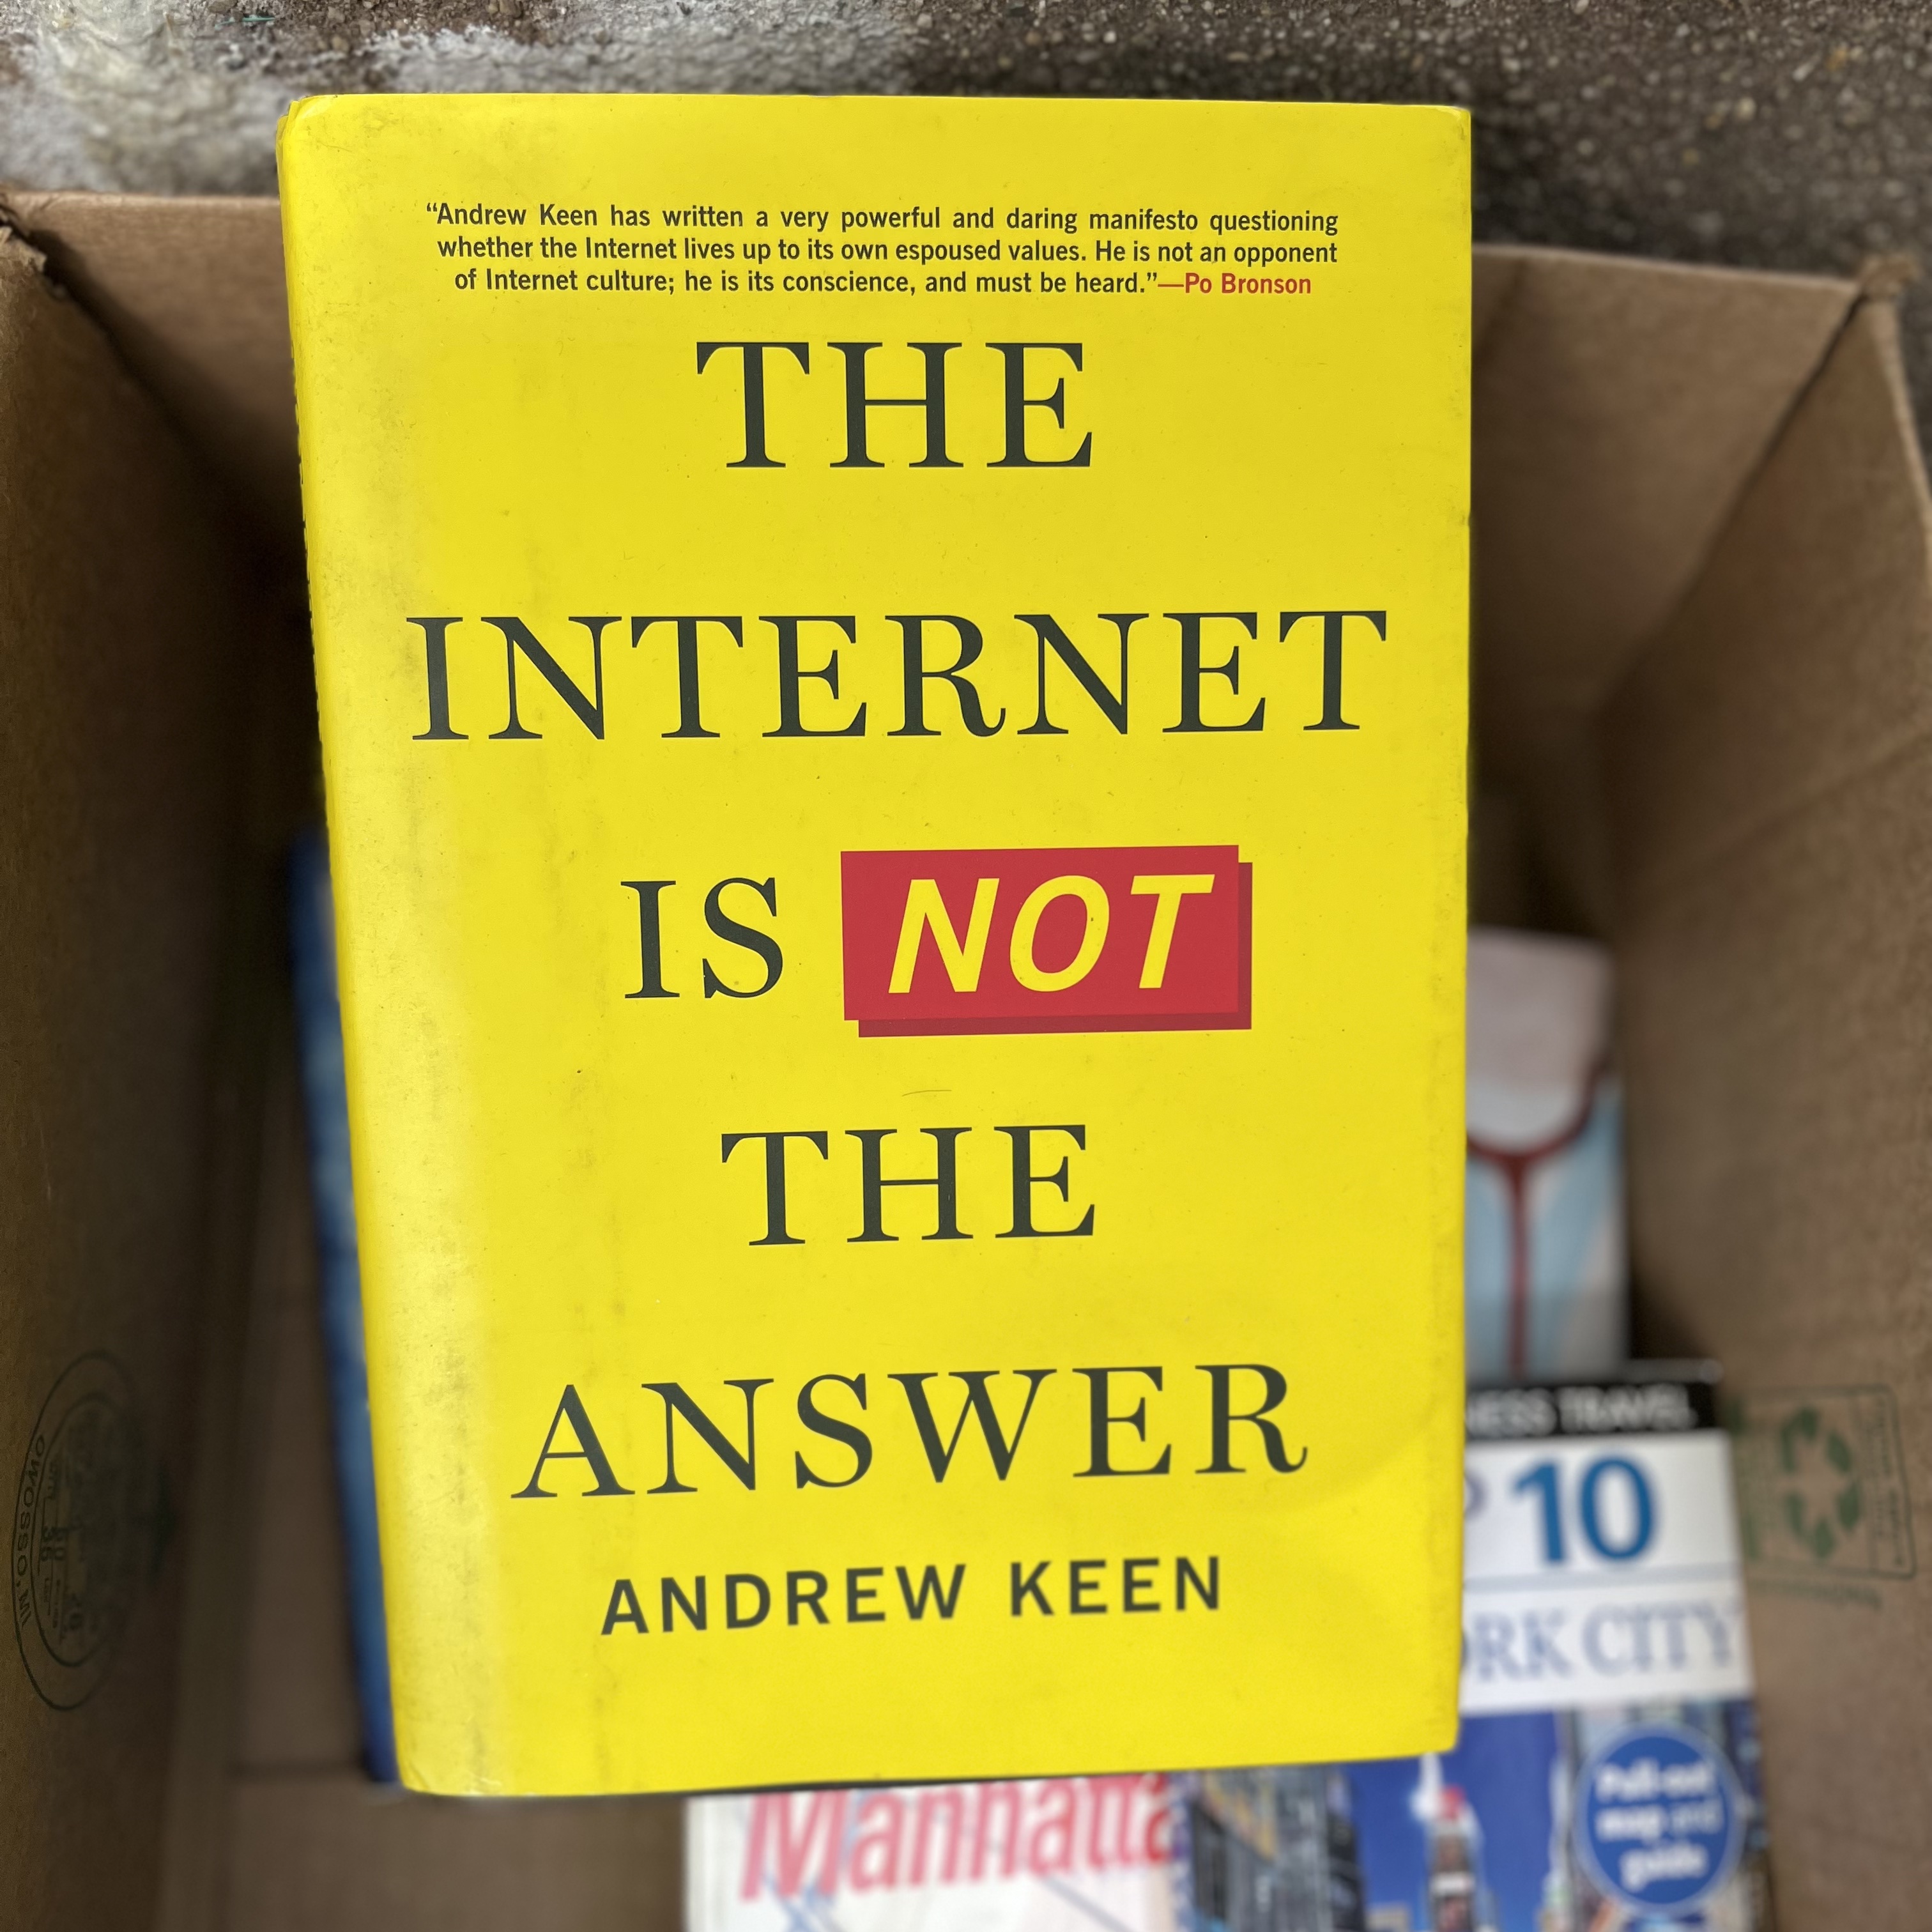 The Internet is Not the Answer. A guest photographer captures some free books up for grabs on Park Place in Brooklyn, NY.